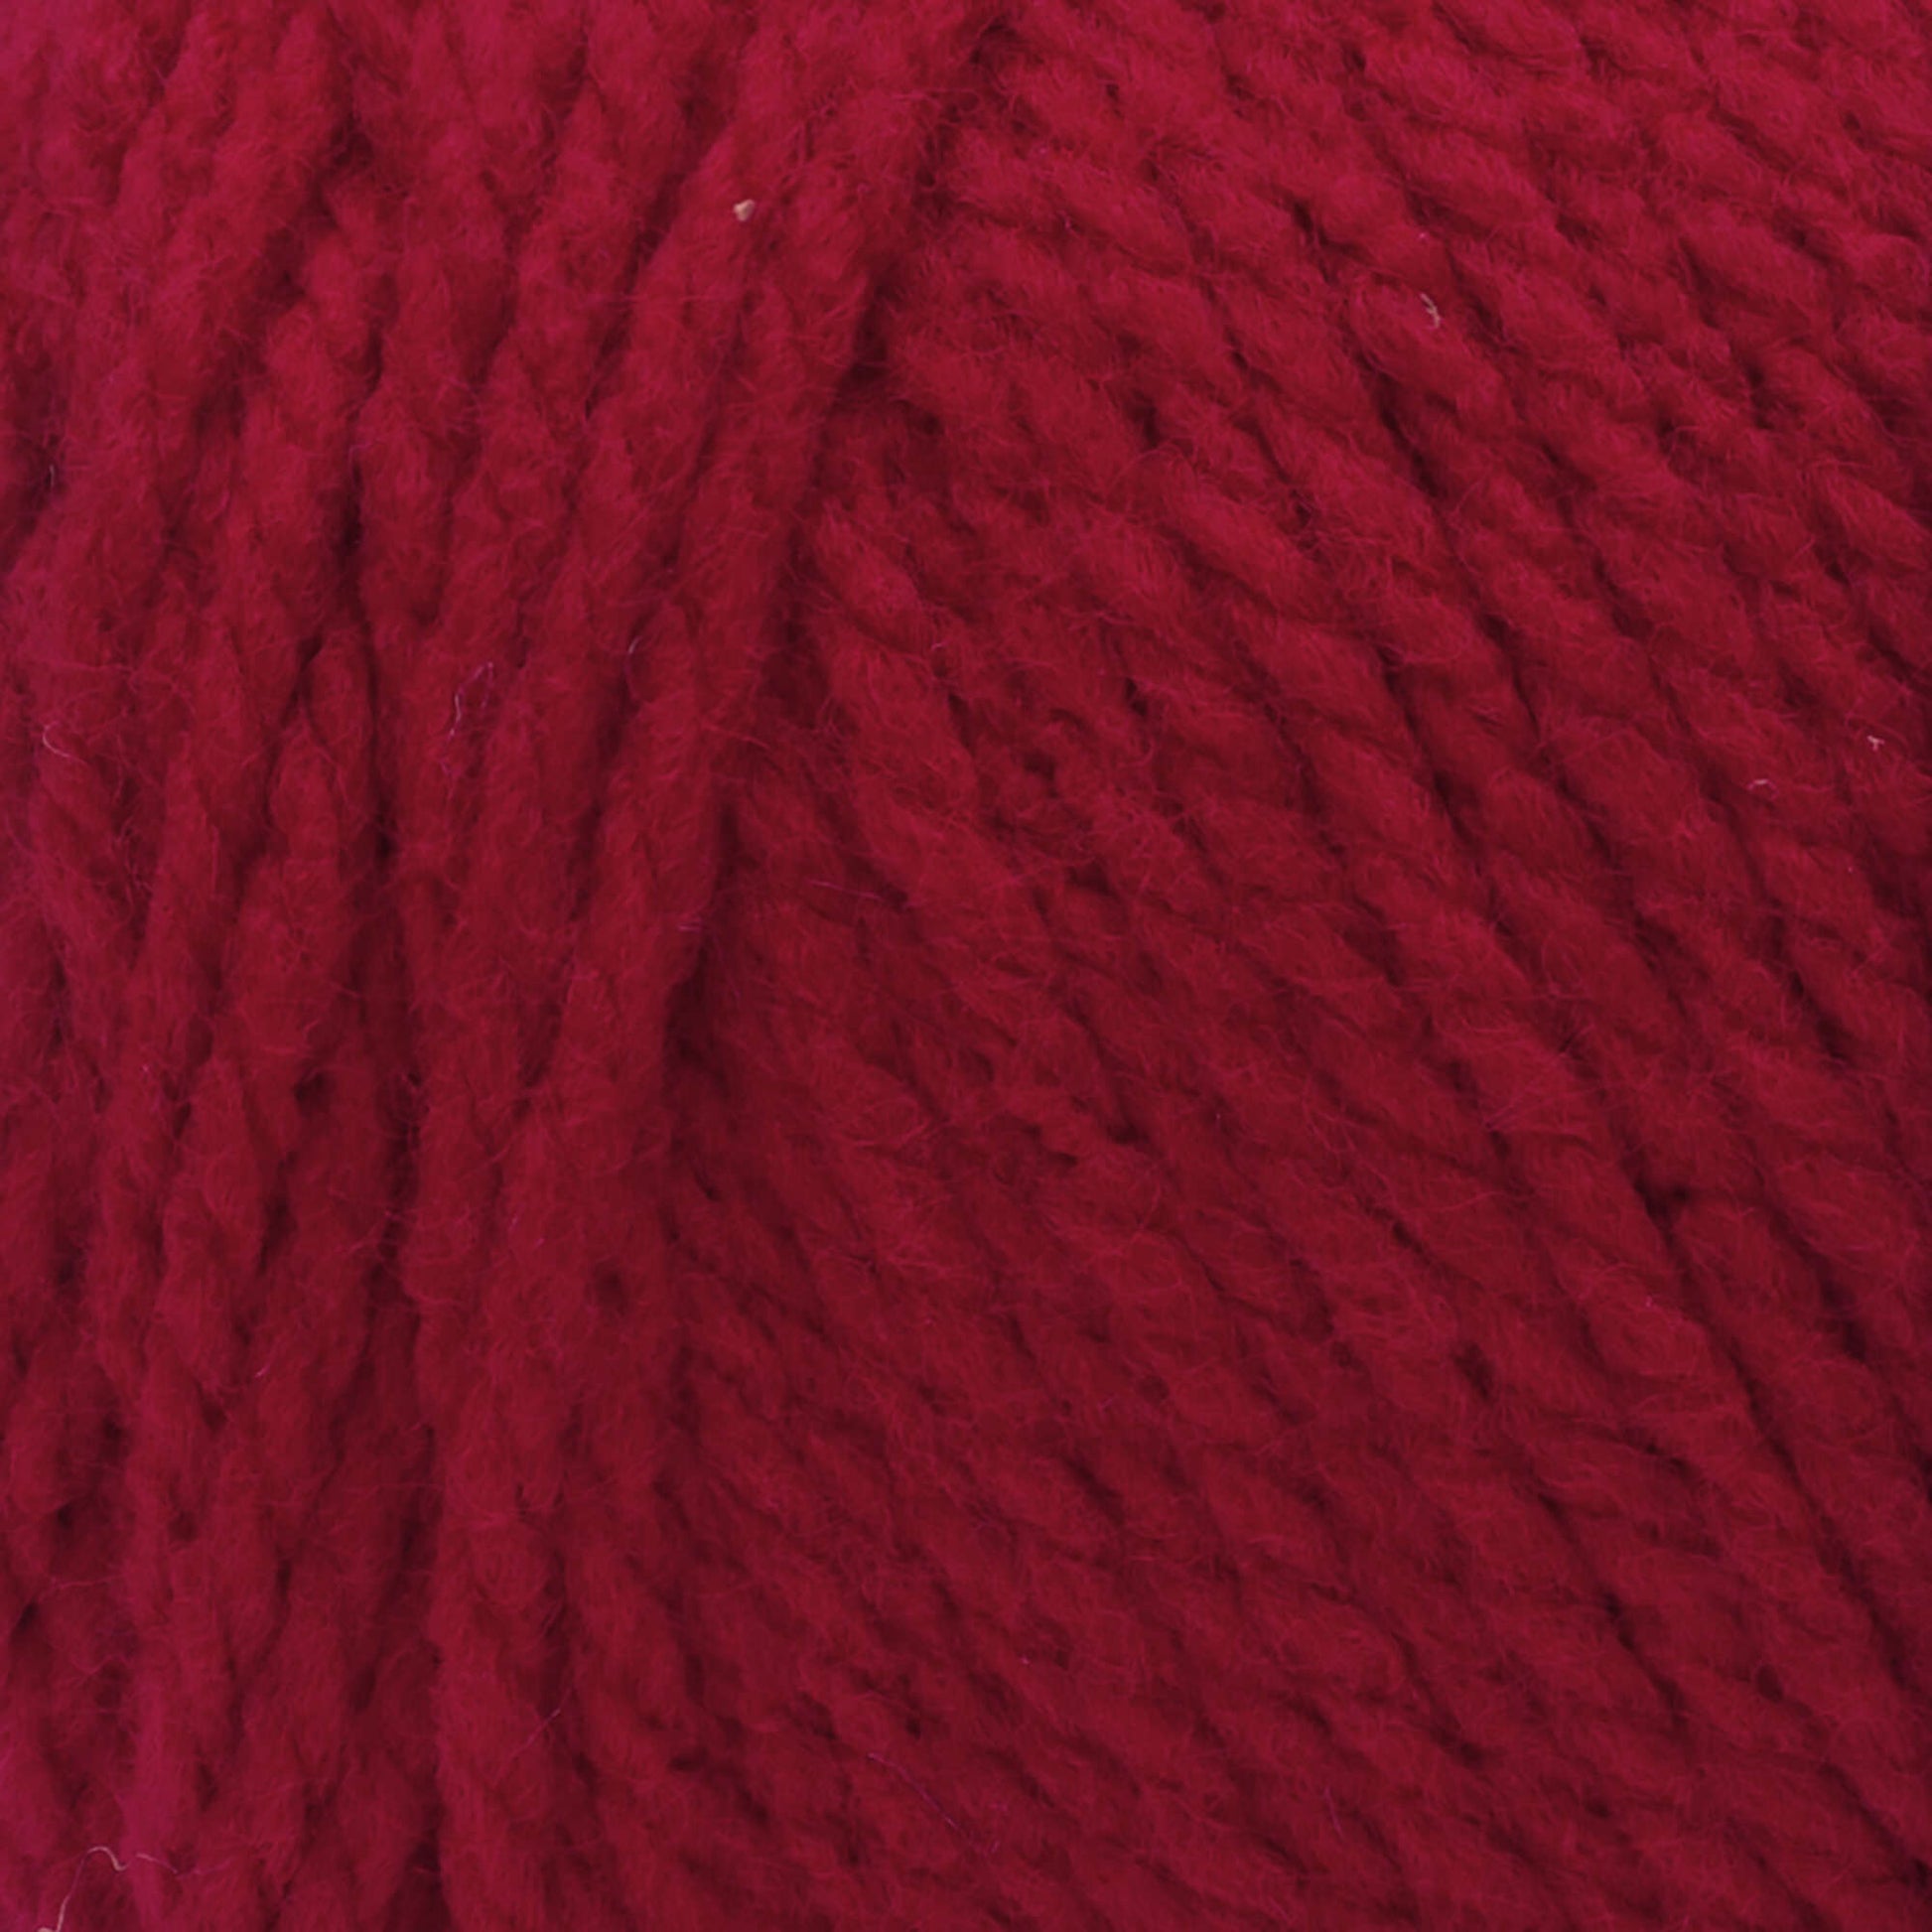 Red Heart Super Saver Chunky Yarn - Clearance shades Cherry Red